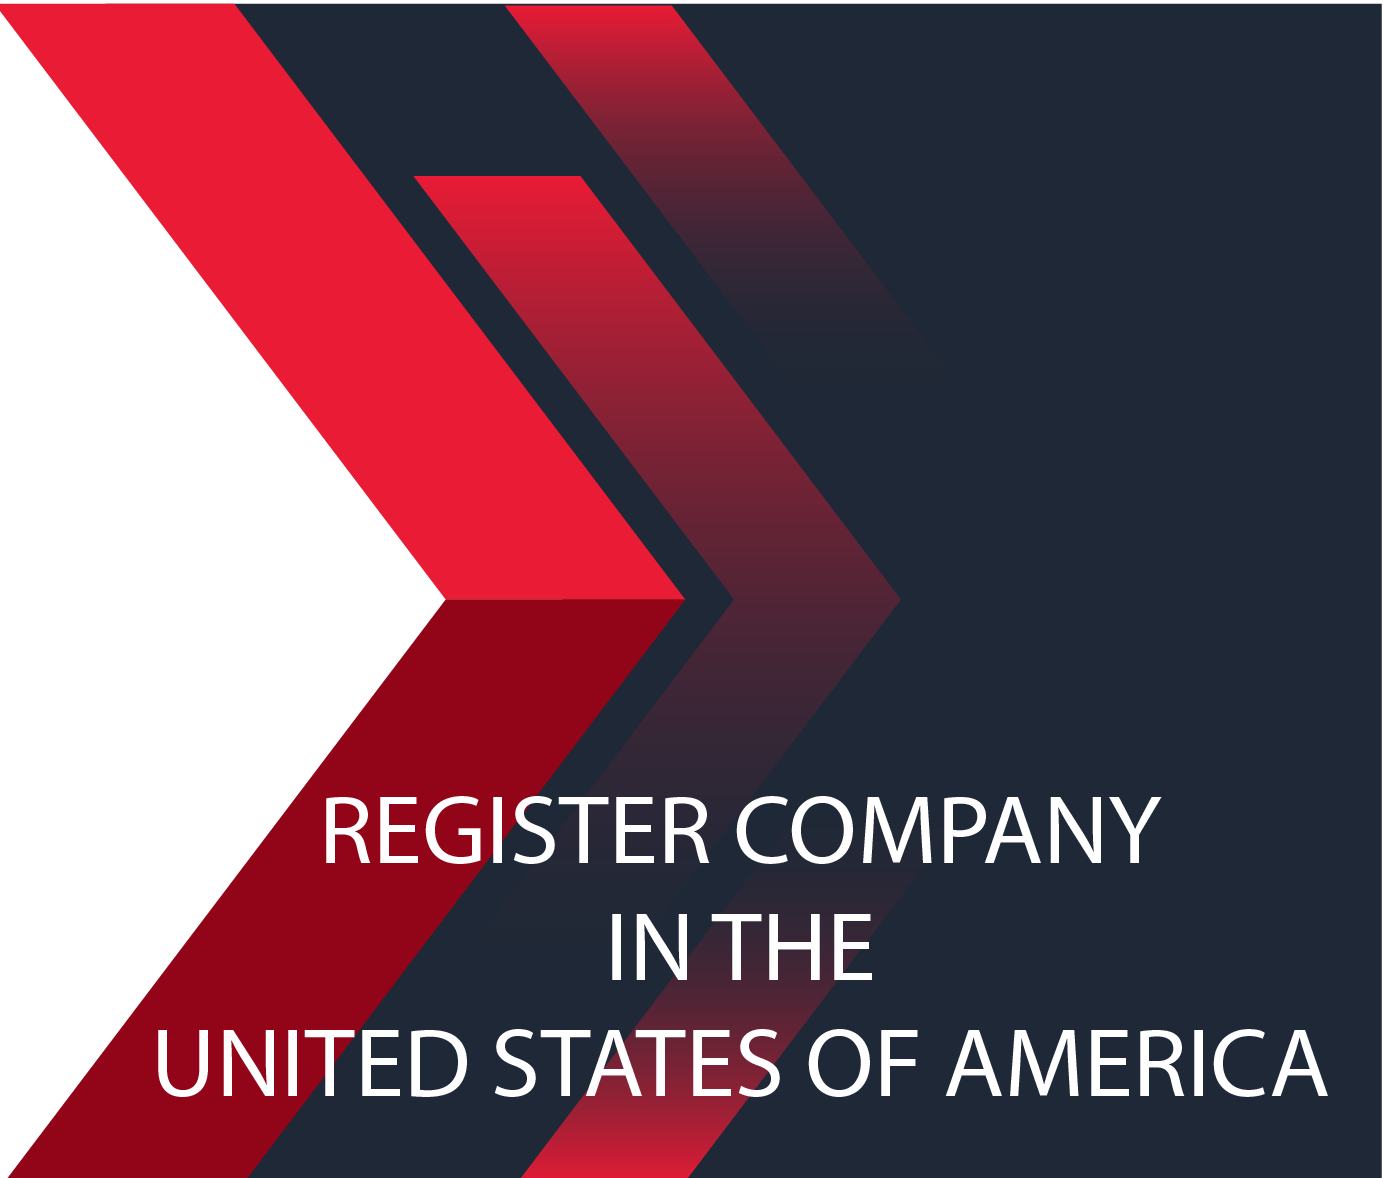 How to register a business name in the United States?